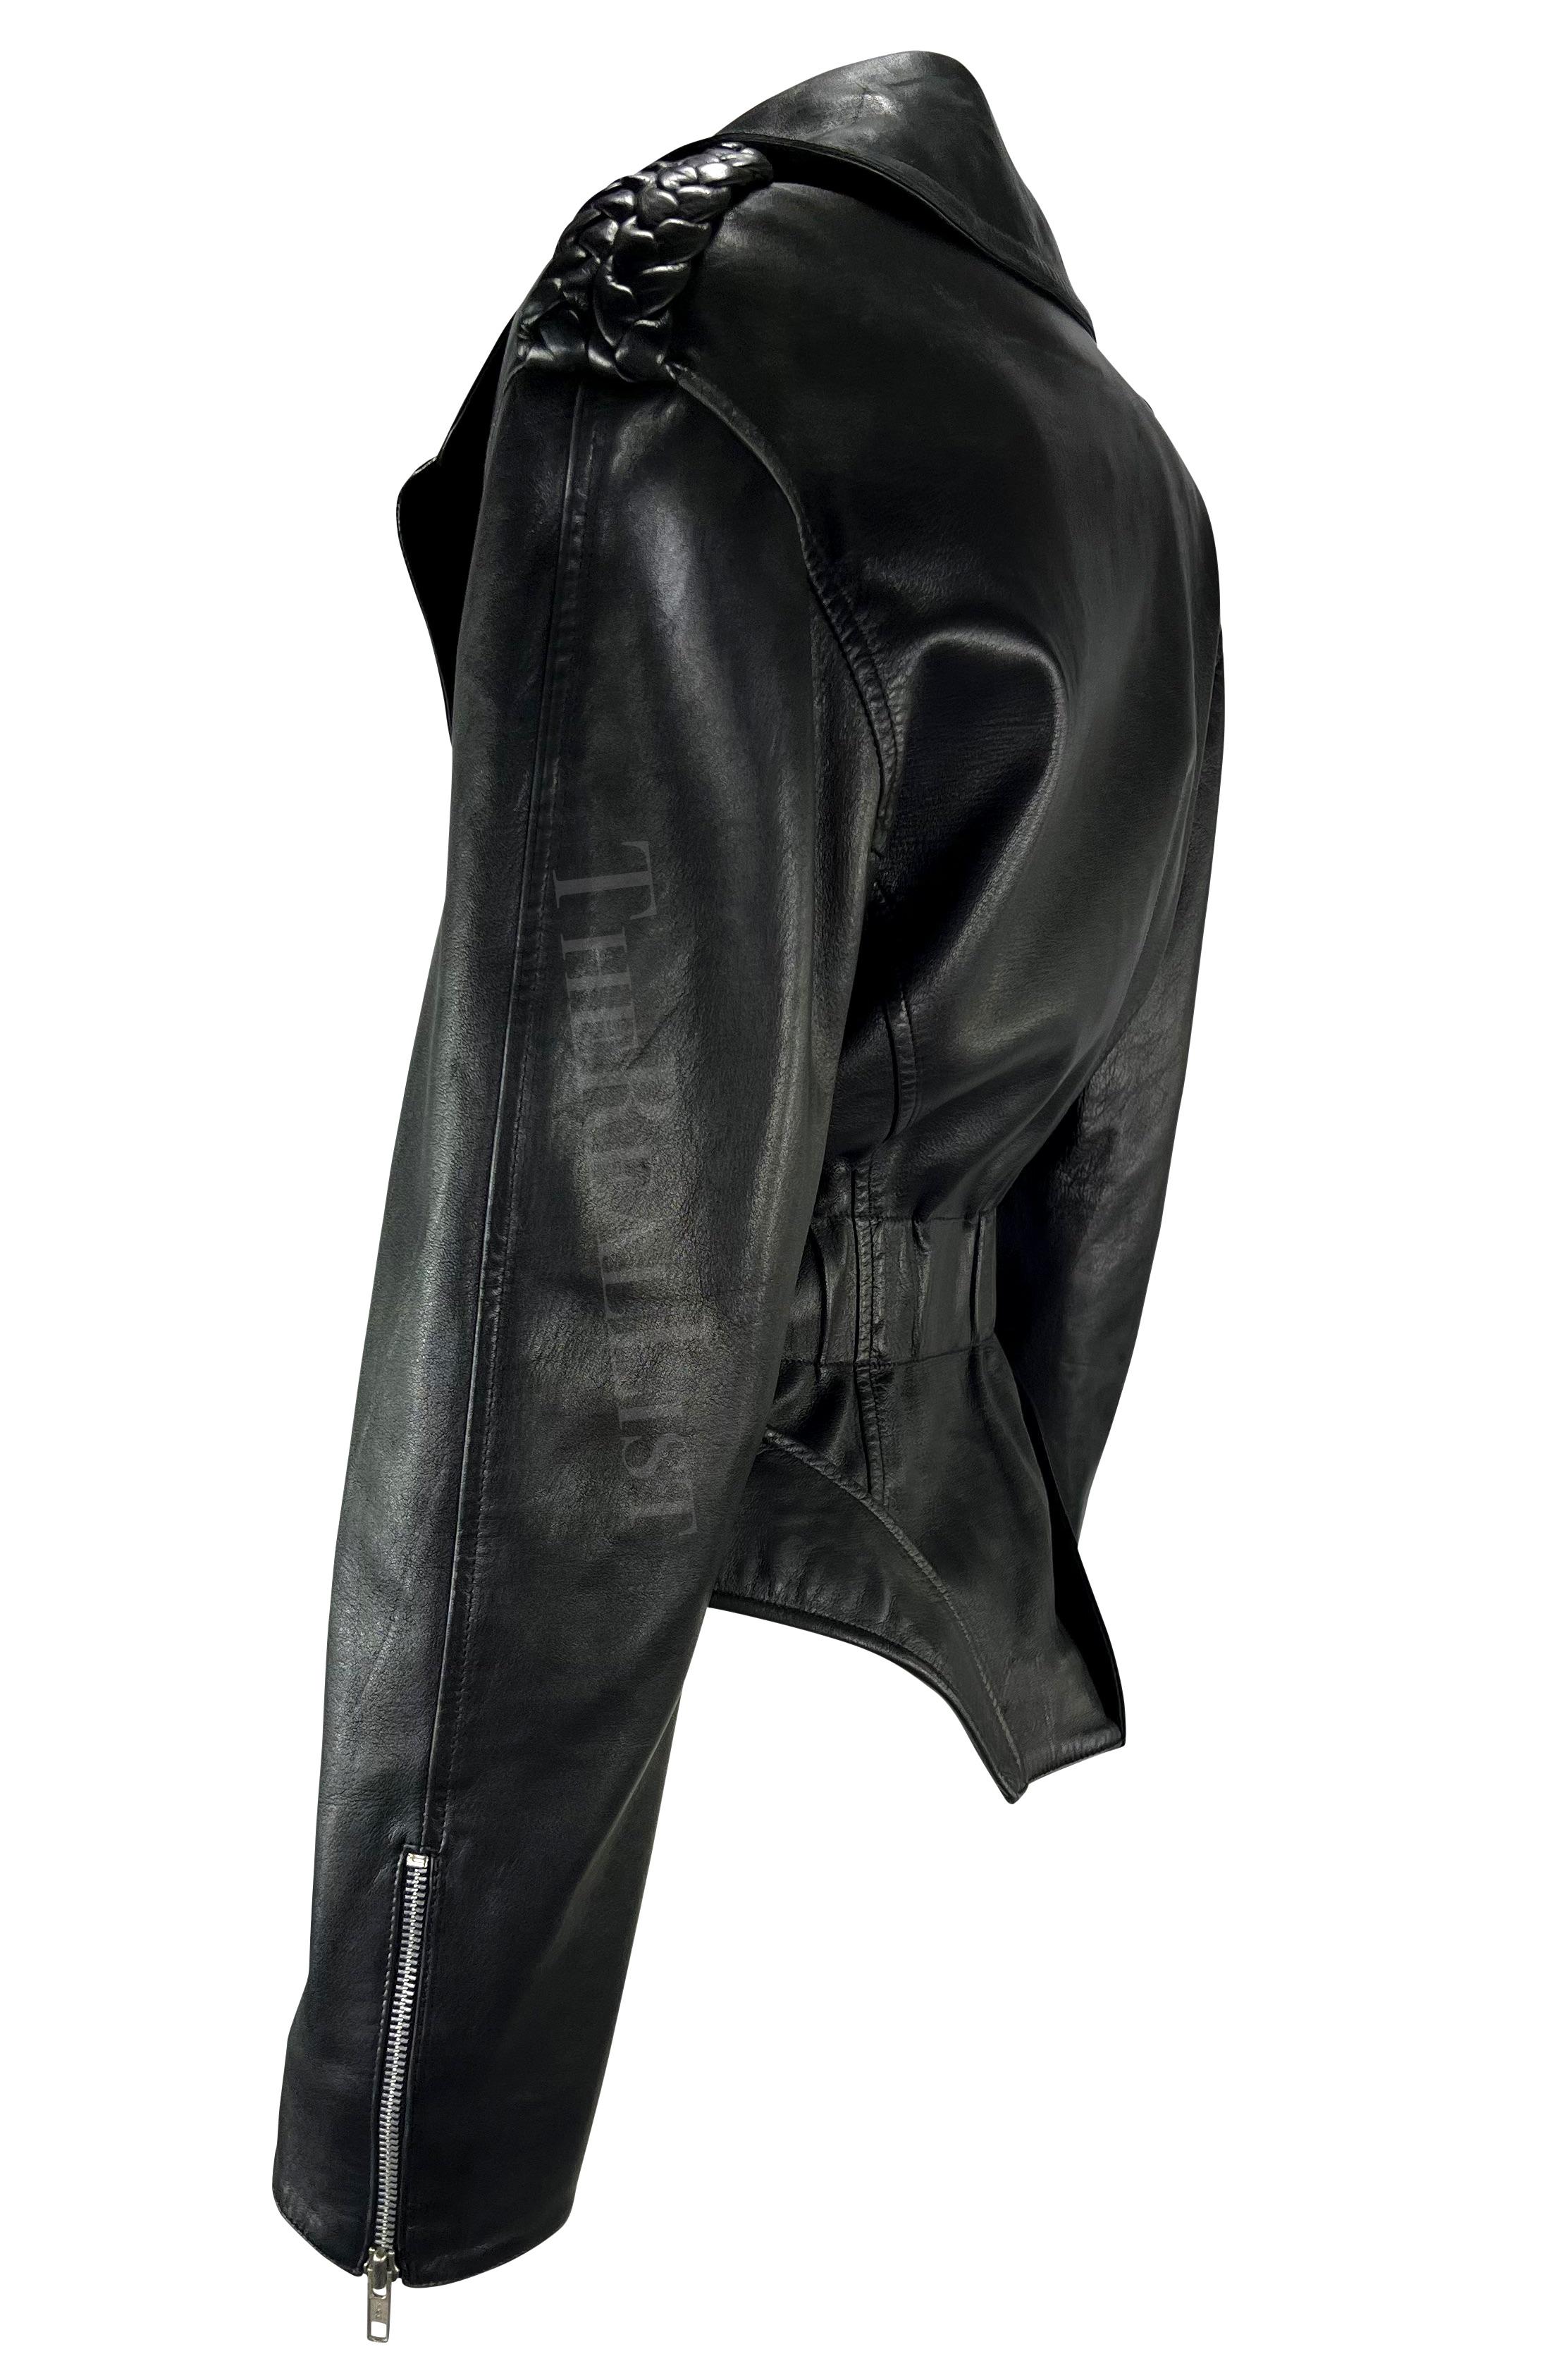 F/W 1988 Thierry Mugler 'Les Infernales' Hip Cutout Leather Moto Biker Jacket For Sale 2